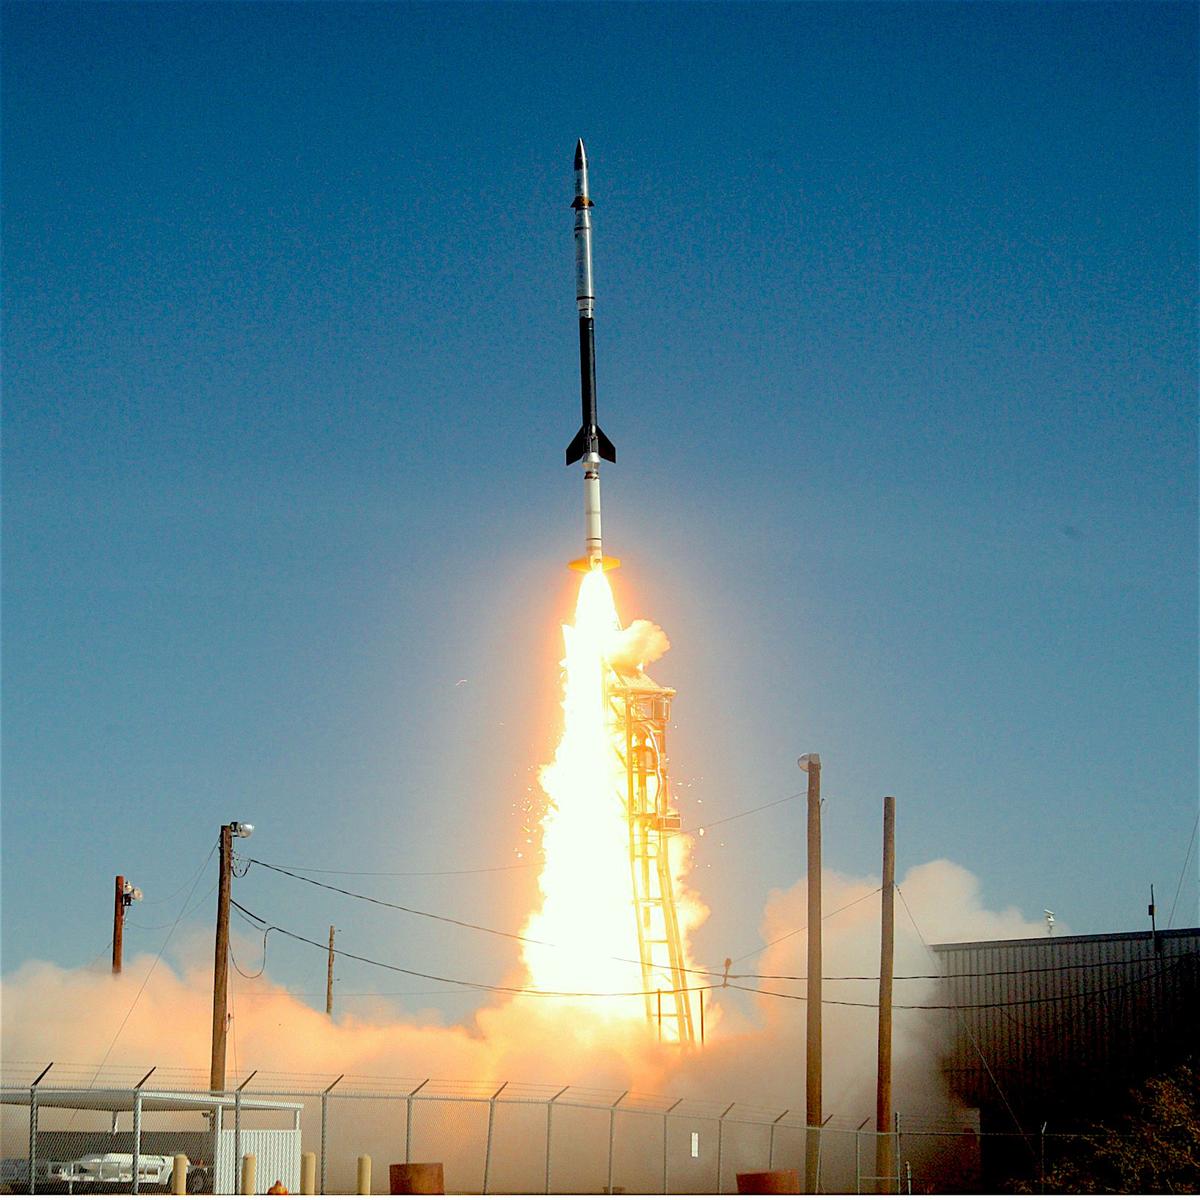 FOXSI-1 mid-launch from the White Sands Missile Range, New Mexico.